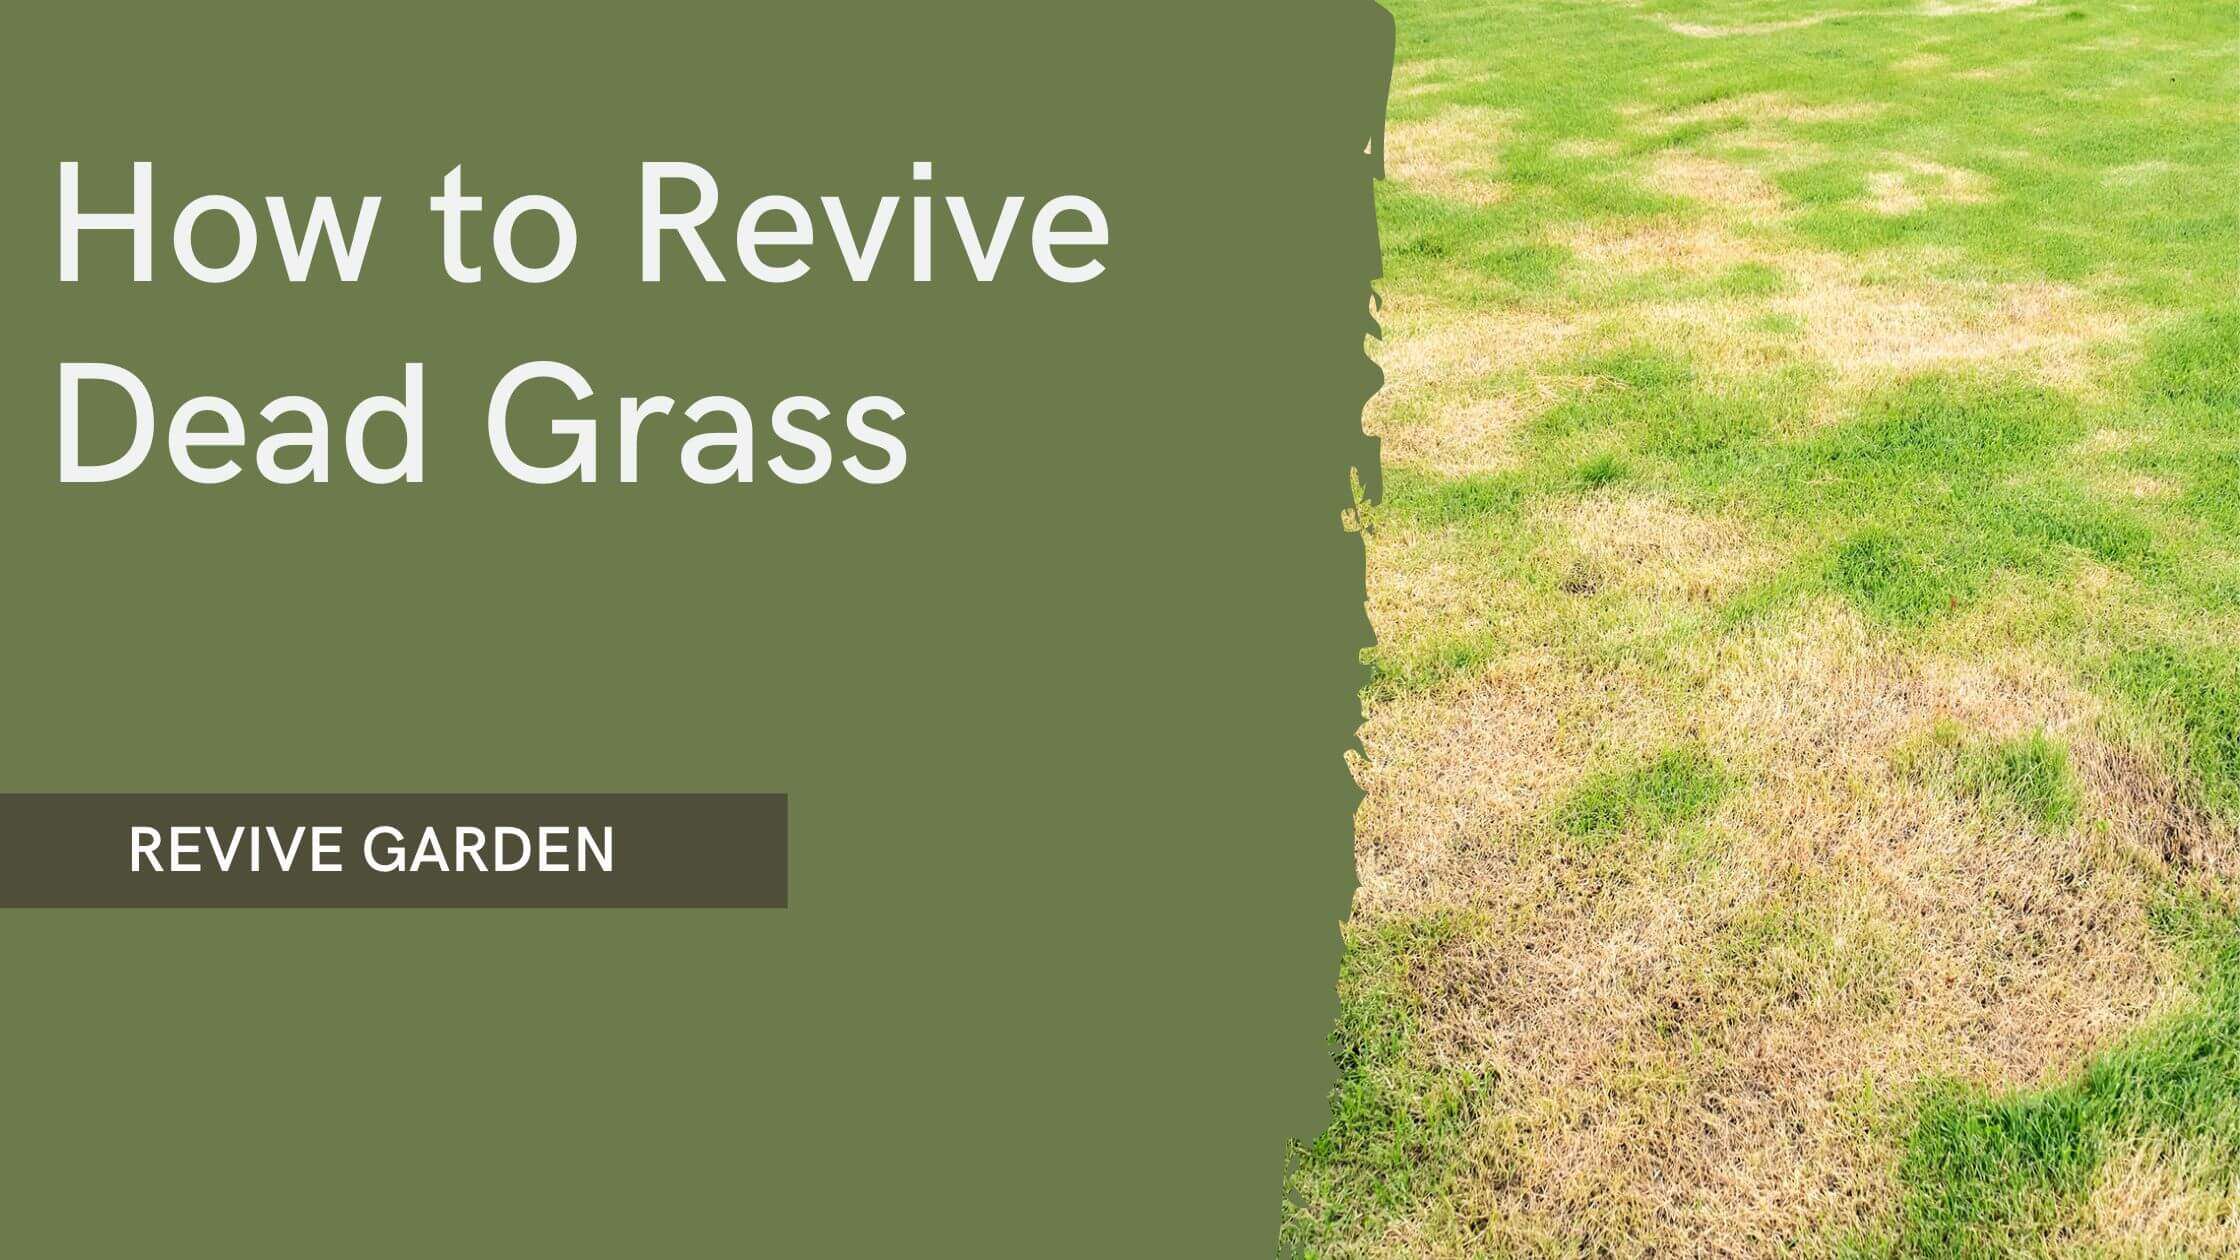 How to Revive Dead Grass